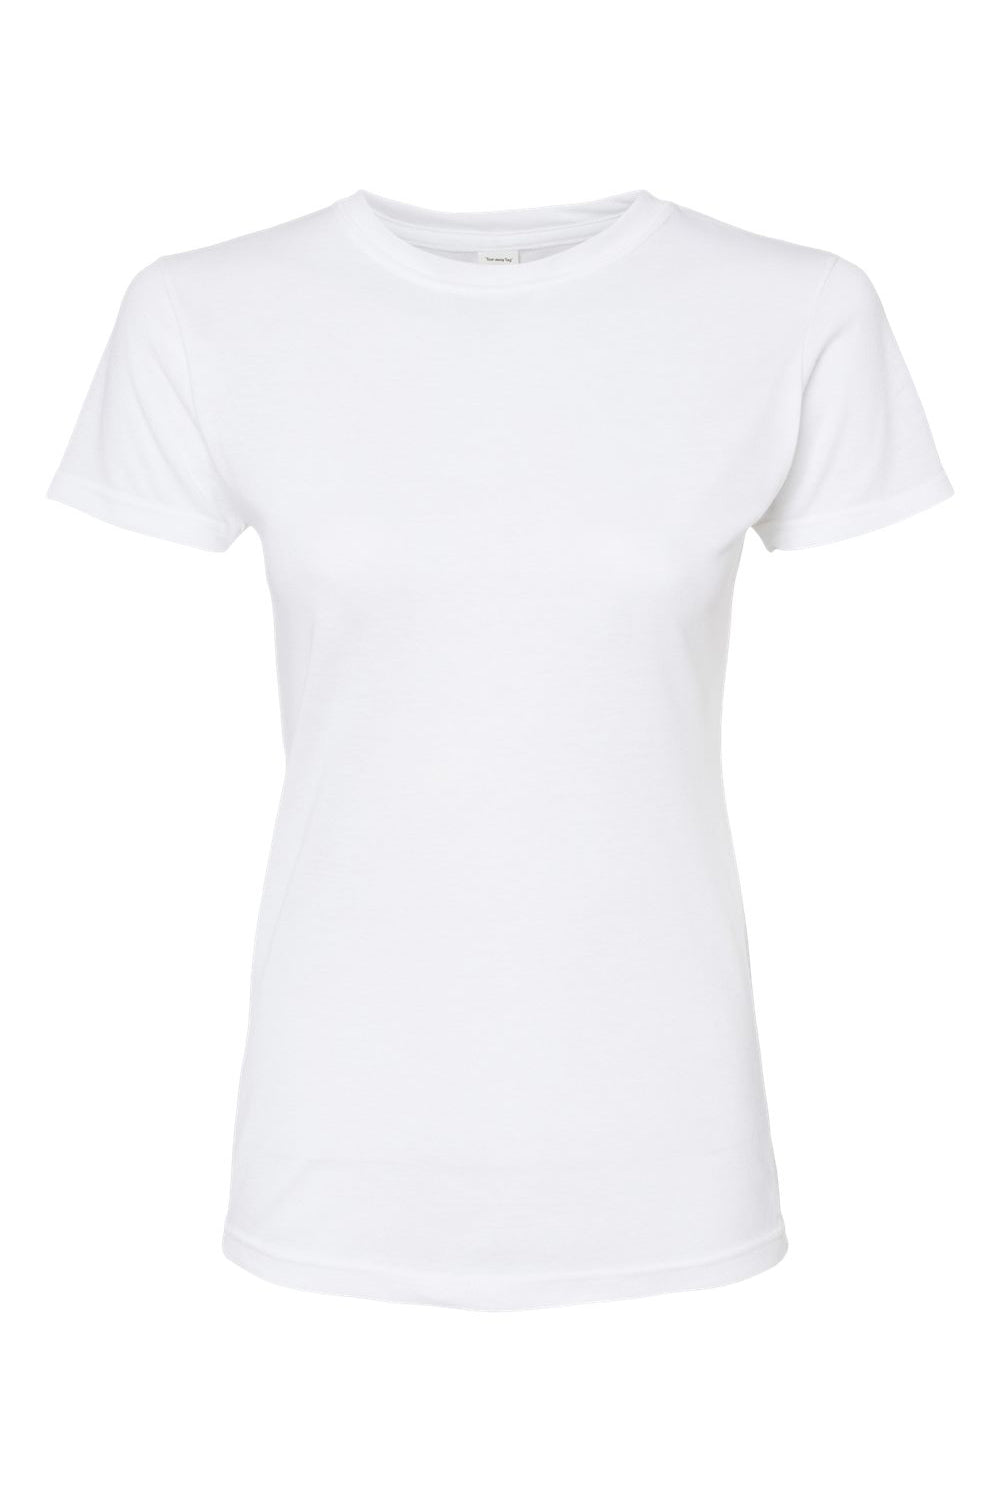 Tultex 240 Womens Poly-Rich Short Sleeve Crewneck T-Shirt White Flat Front